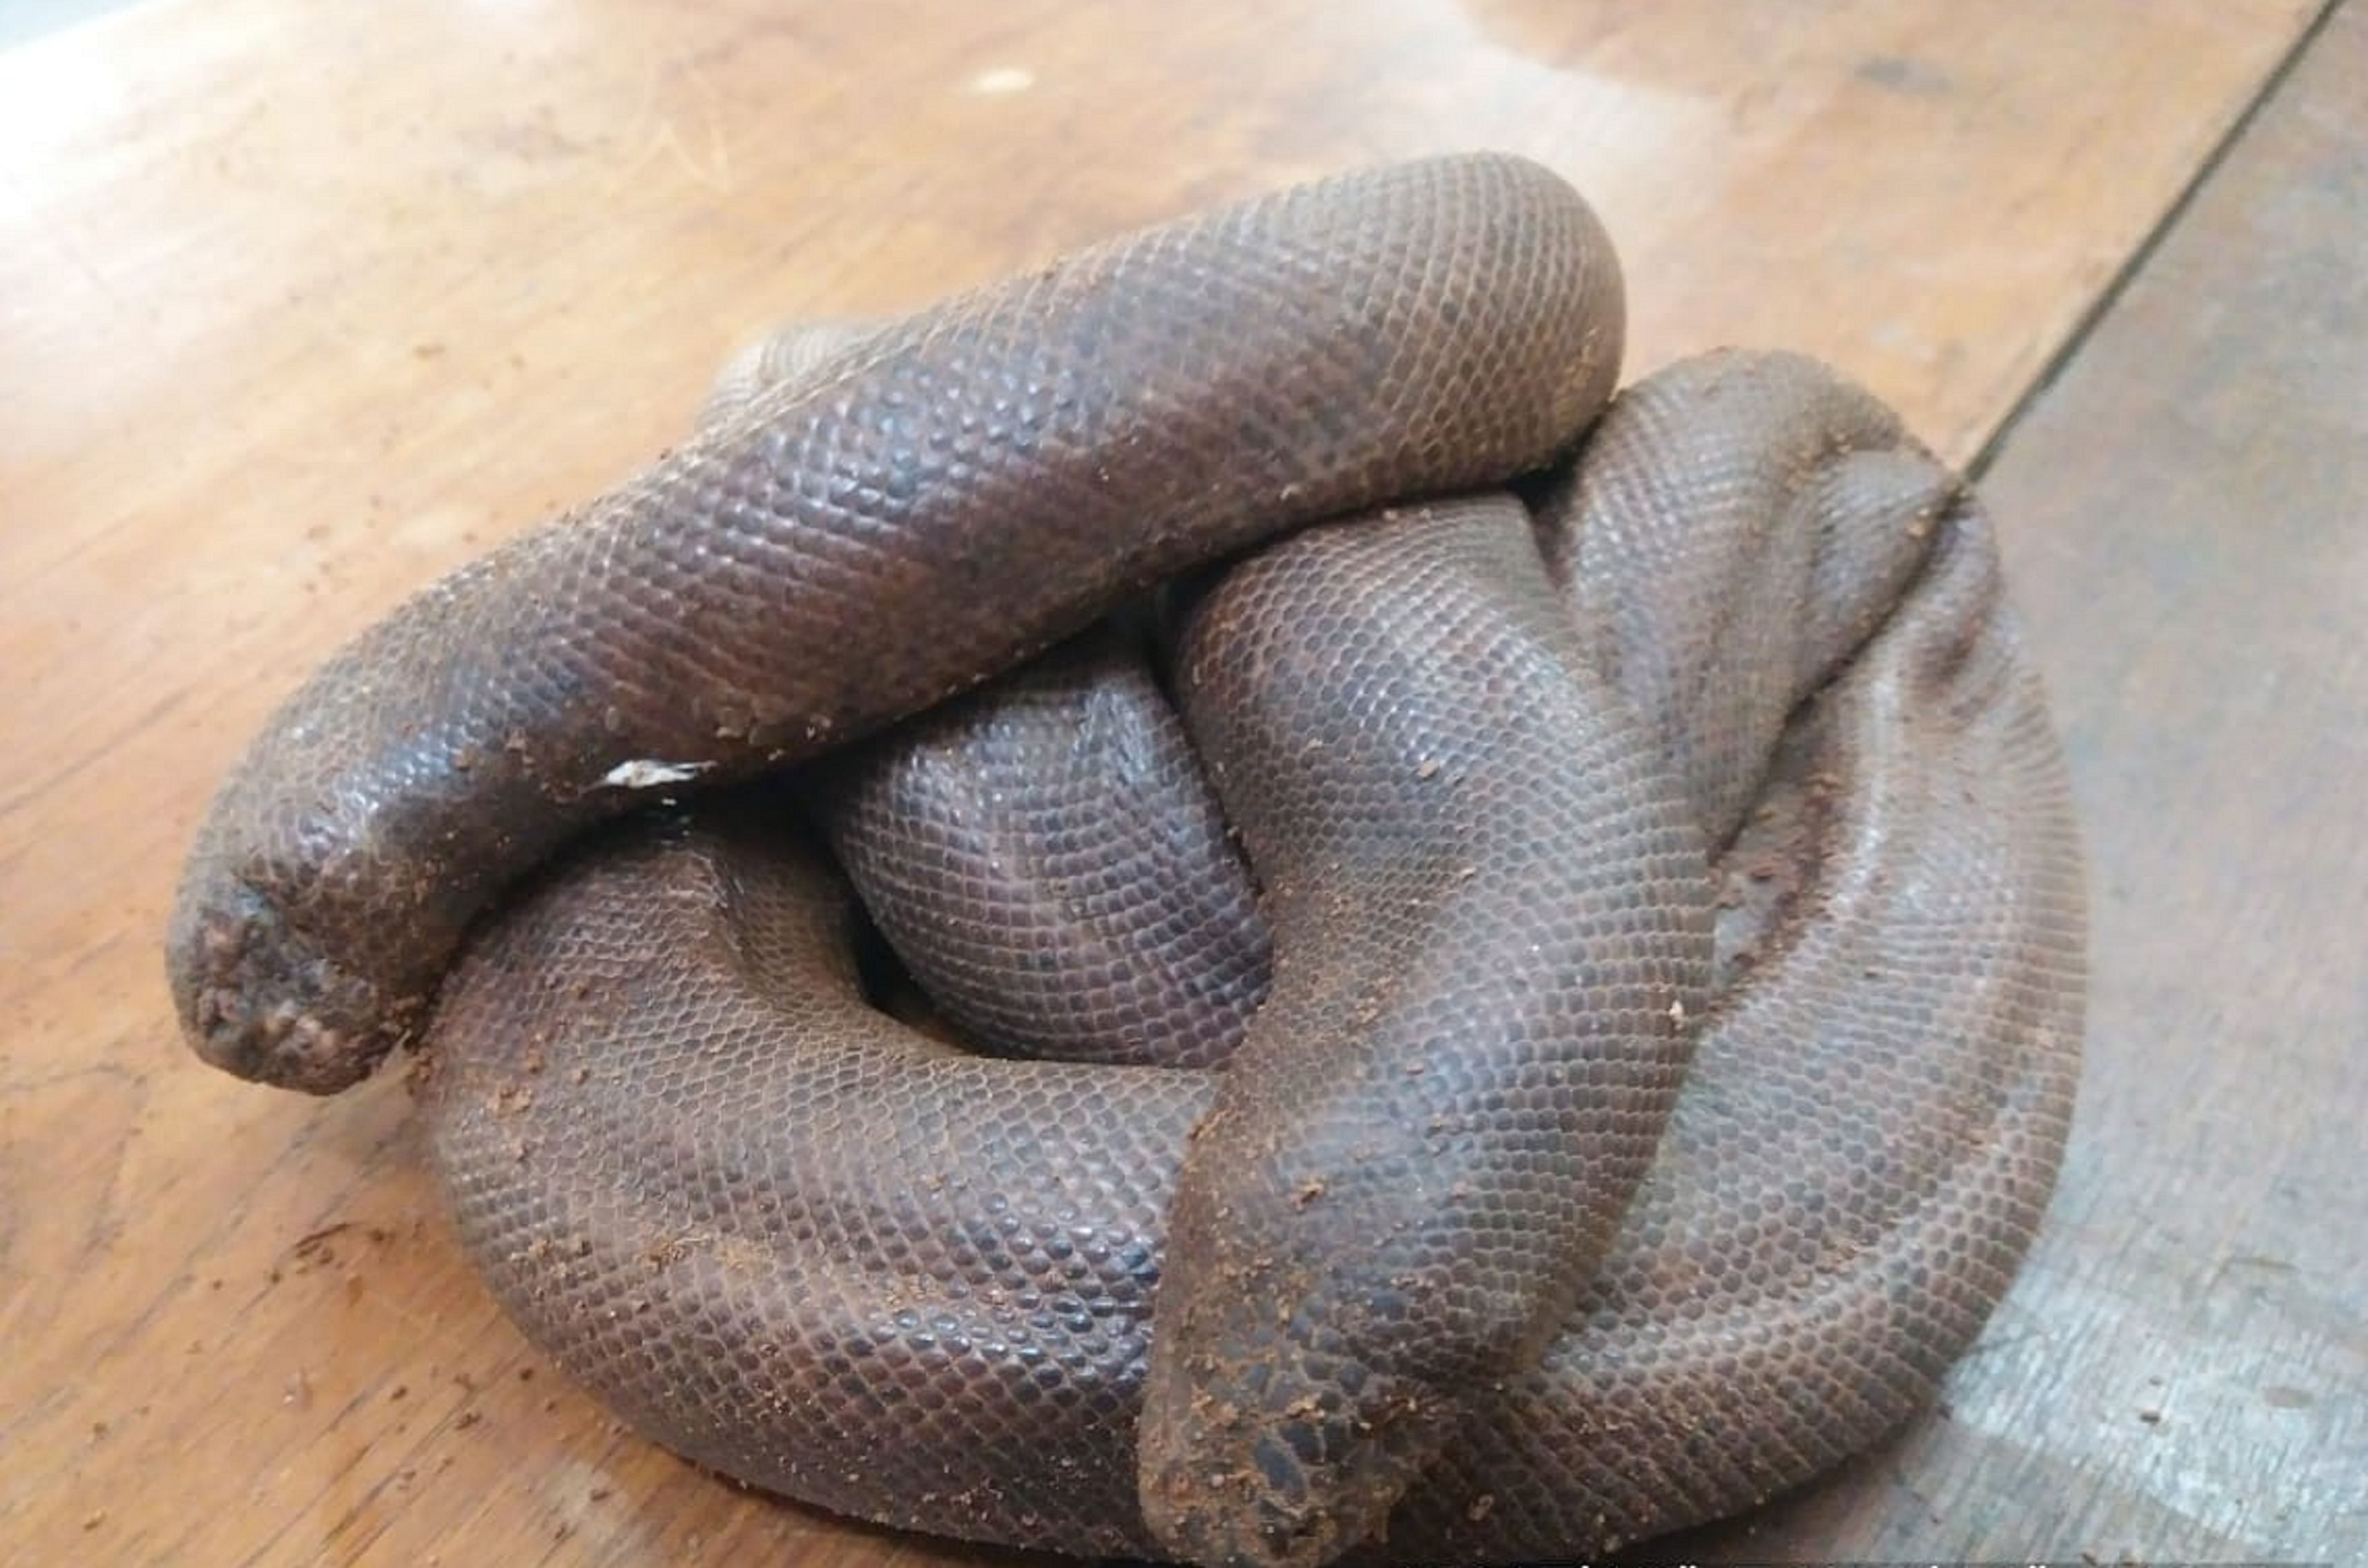 The sand boa that was rescued, in Mysuru. Credit: Special Arrangement